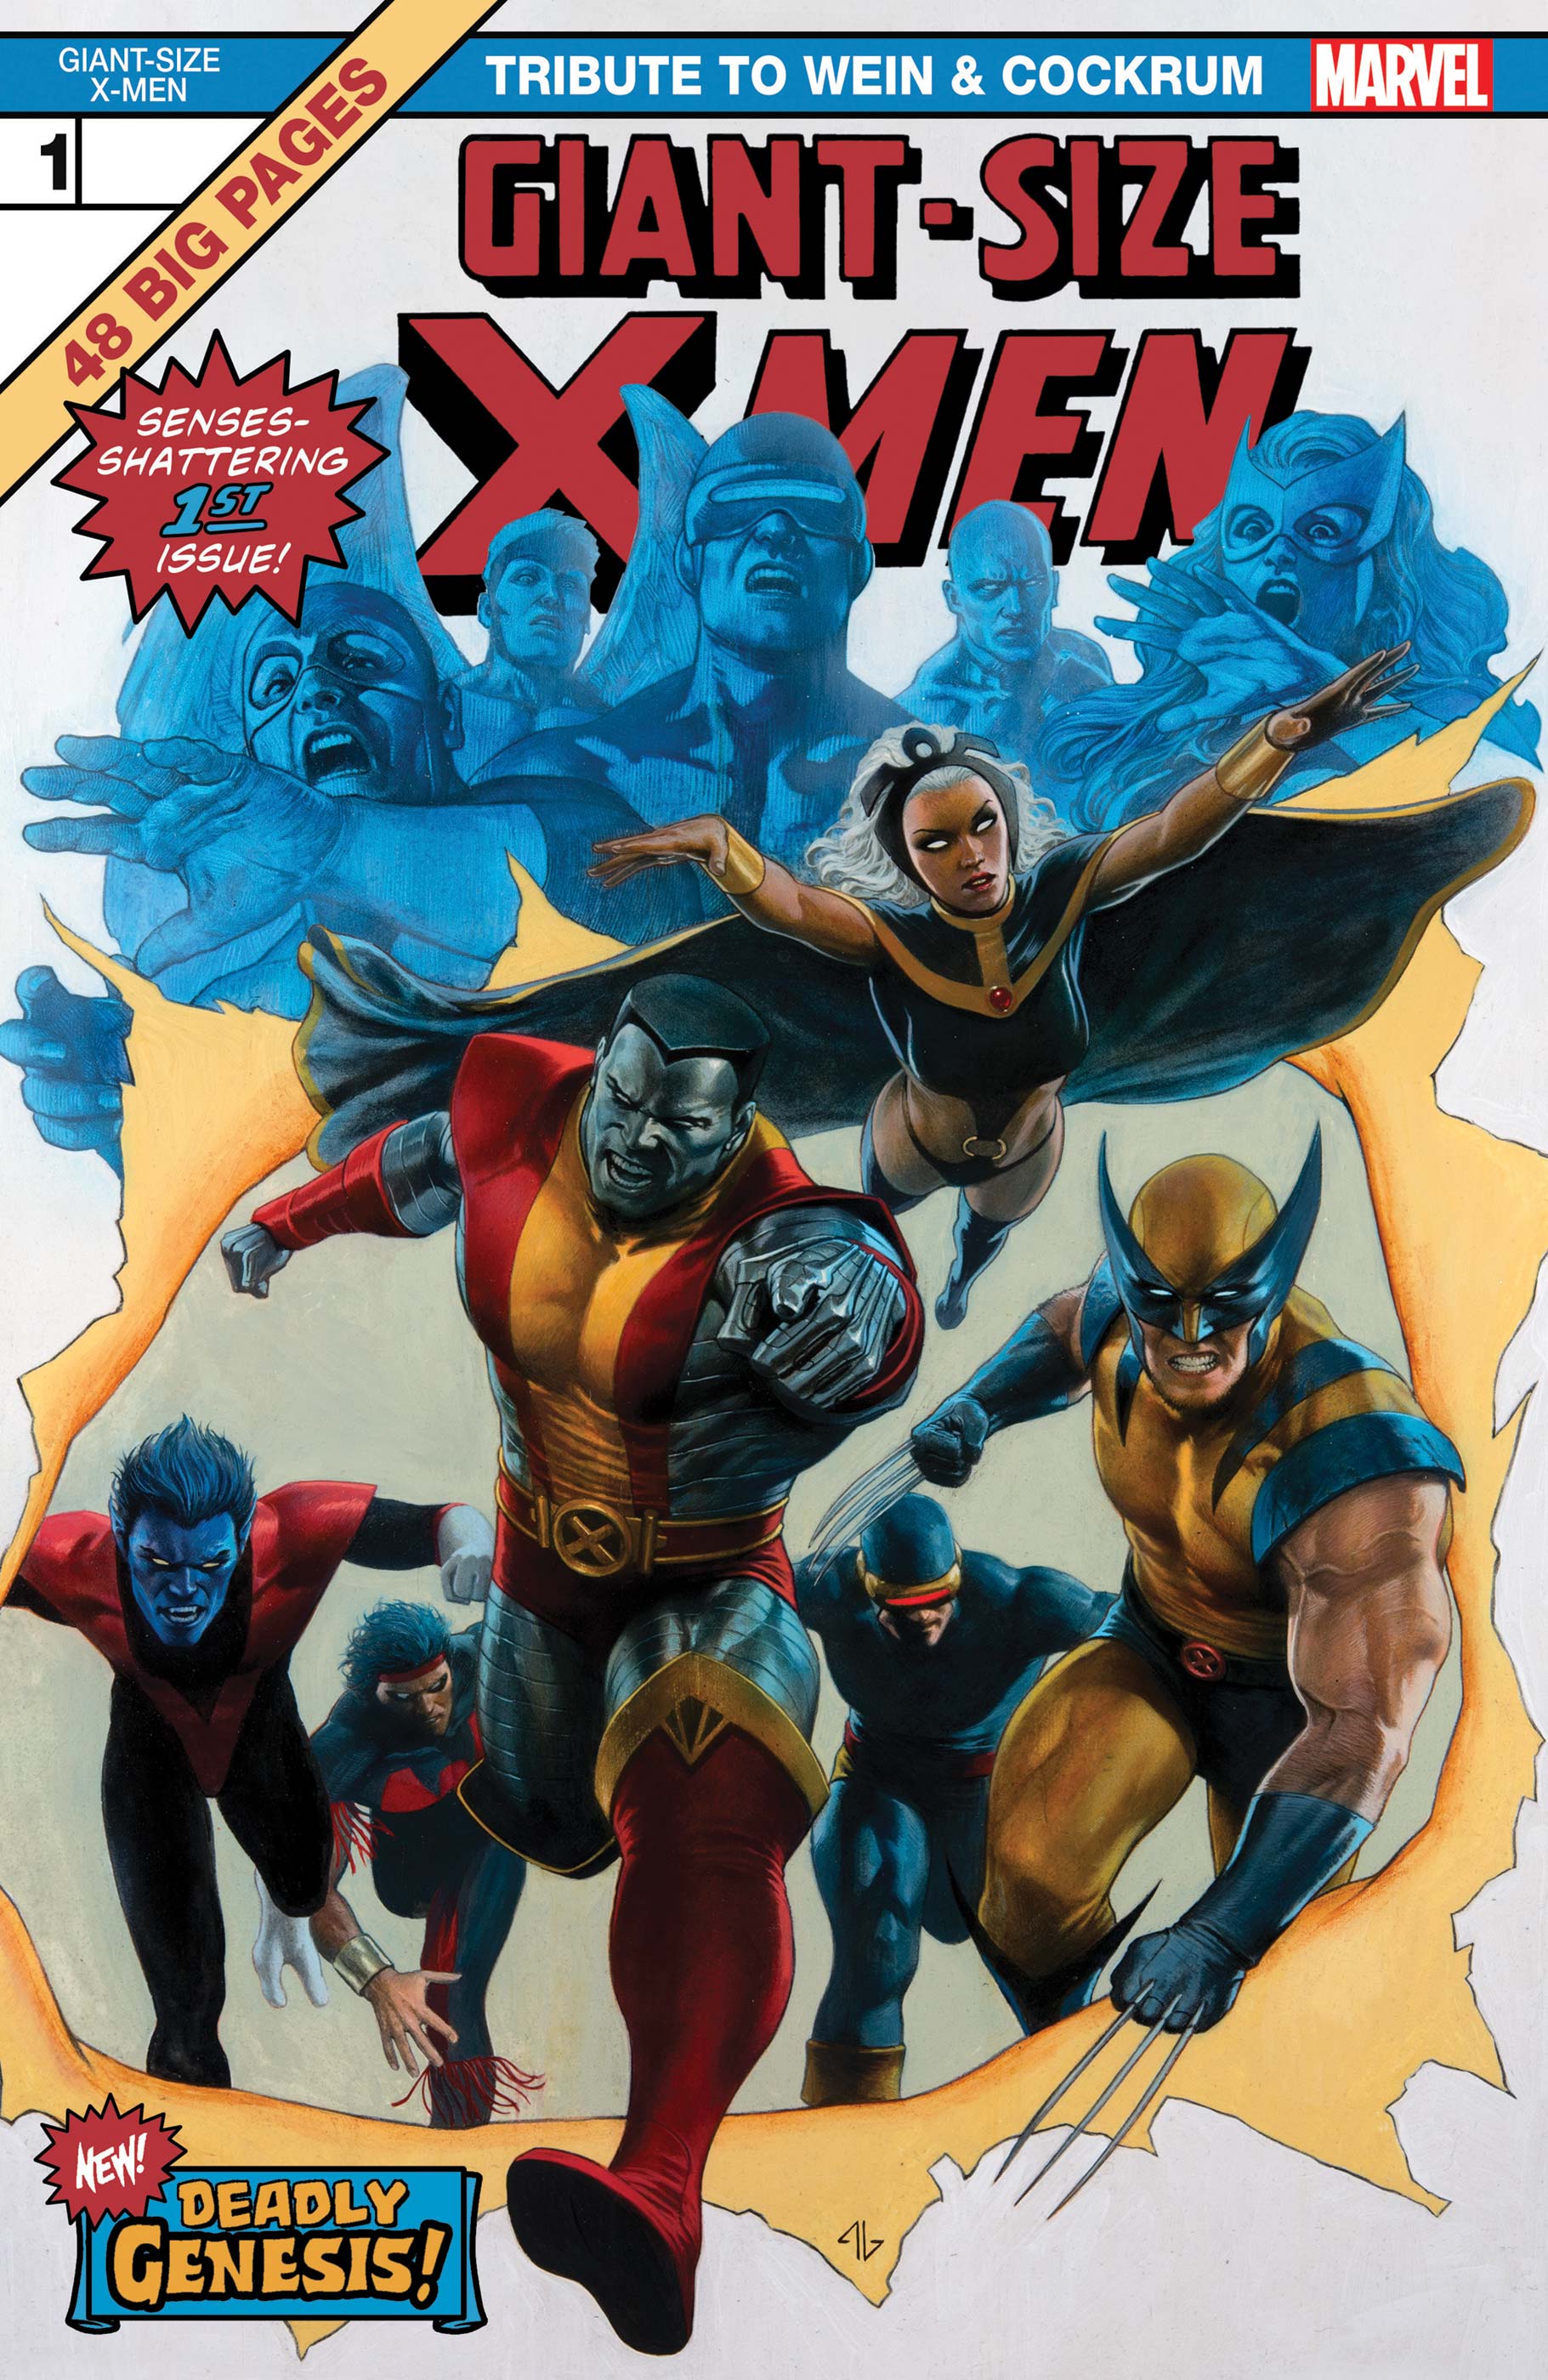 Giant-Size X-Men: Tribute To Wein & Cockrum (2020) #1